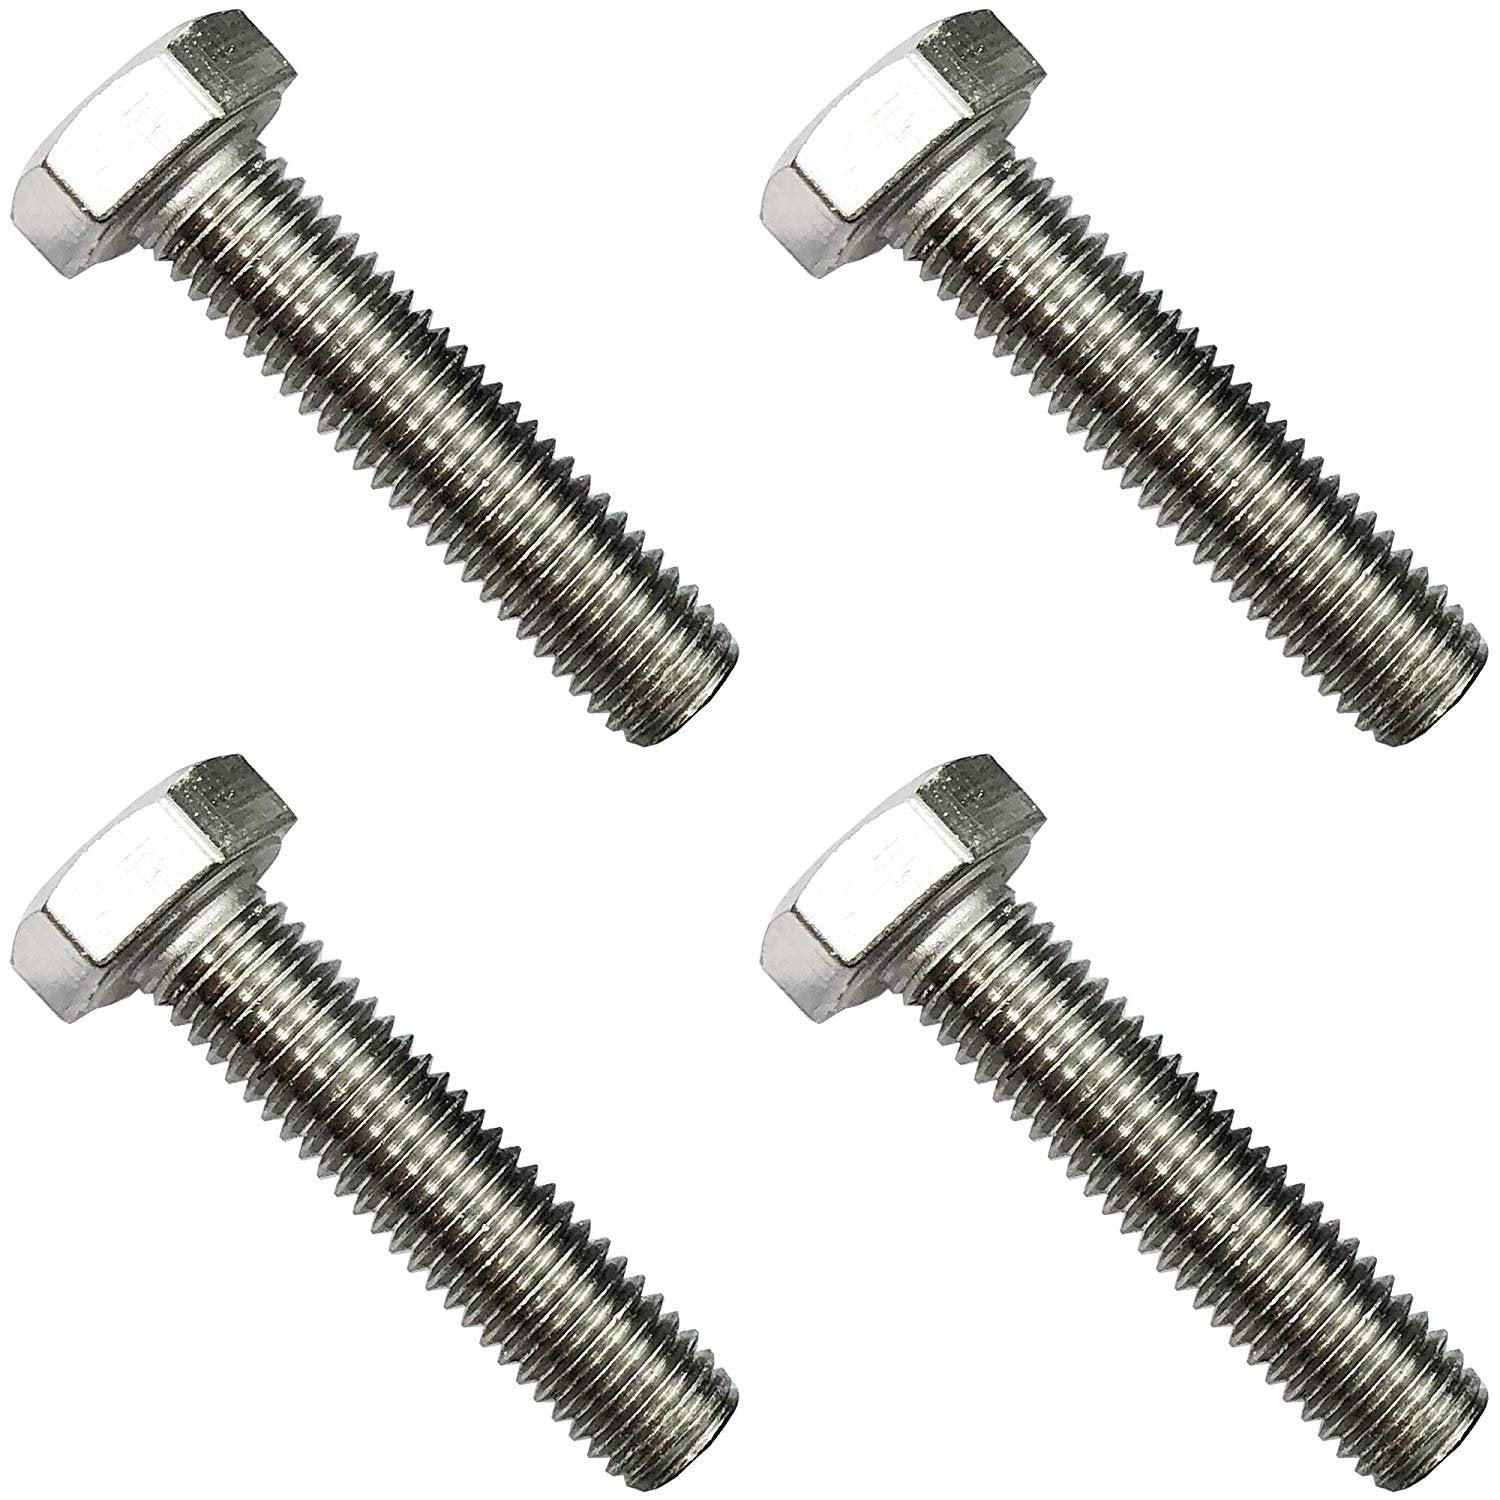 1/4 -20 x 2 Hex Head Bolt 18-8 Stainless Steel